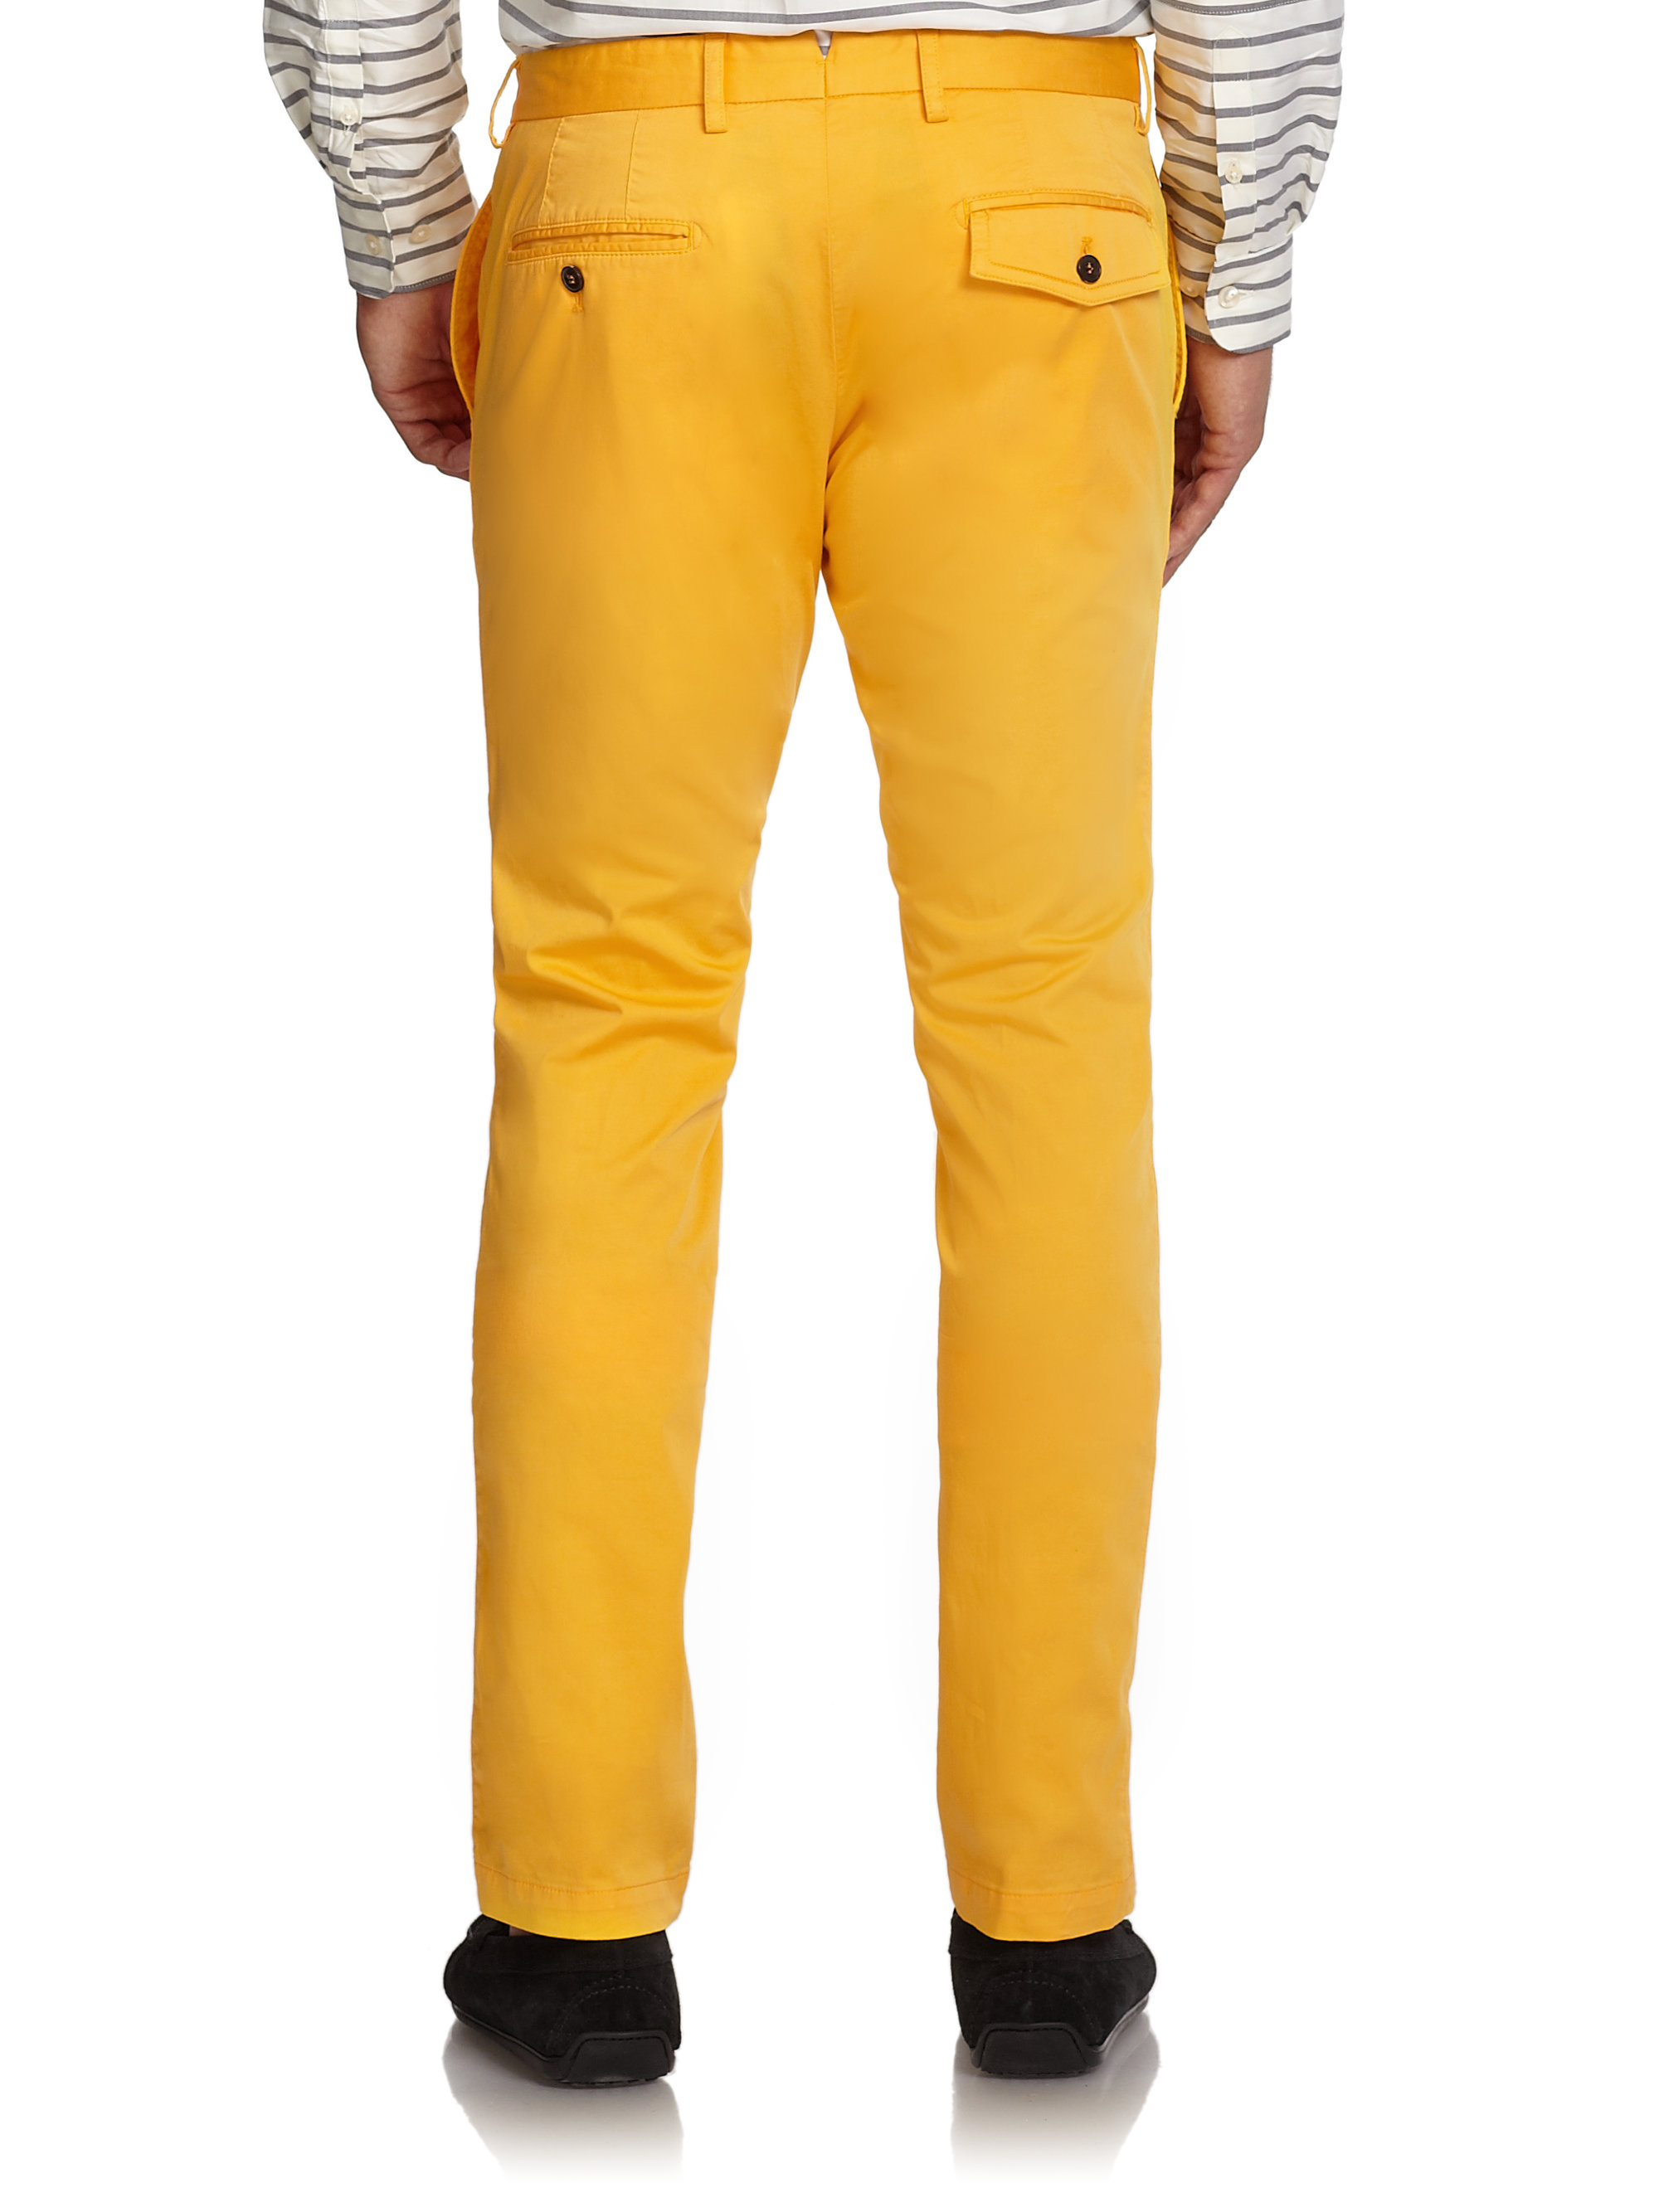 F. Faconnable Slim-fit Pants in Yellow for Men - Lyst